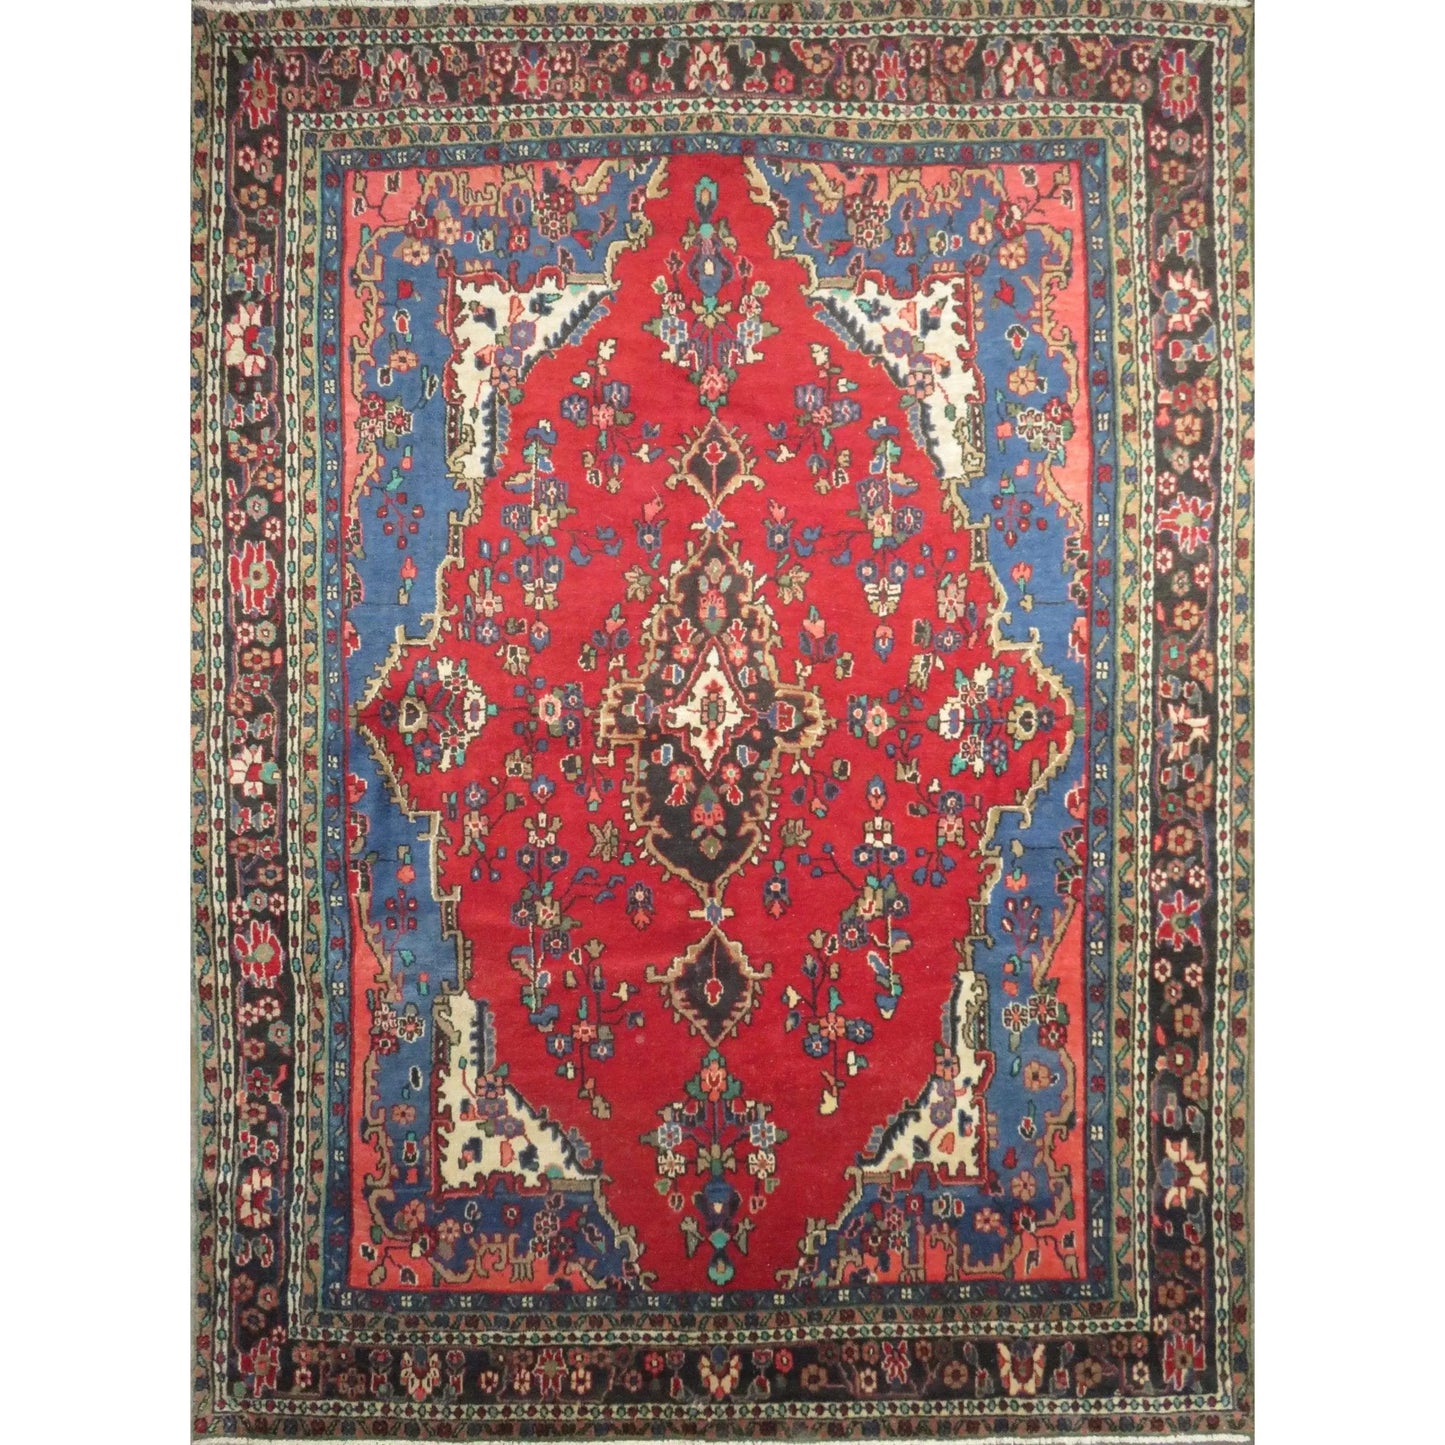 Hand-Knotted Persian Wool Rug _ Luxurious Vintage Design, 11'5" x 8'1", Artisan Crafted